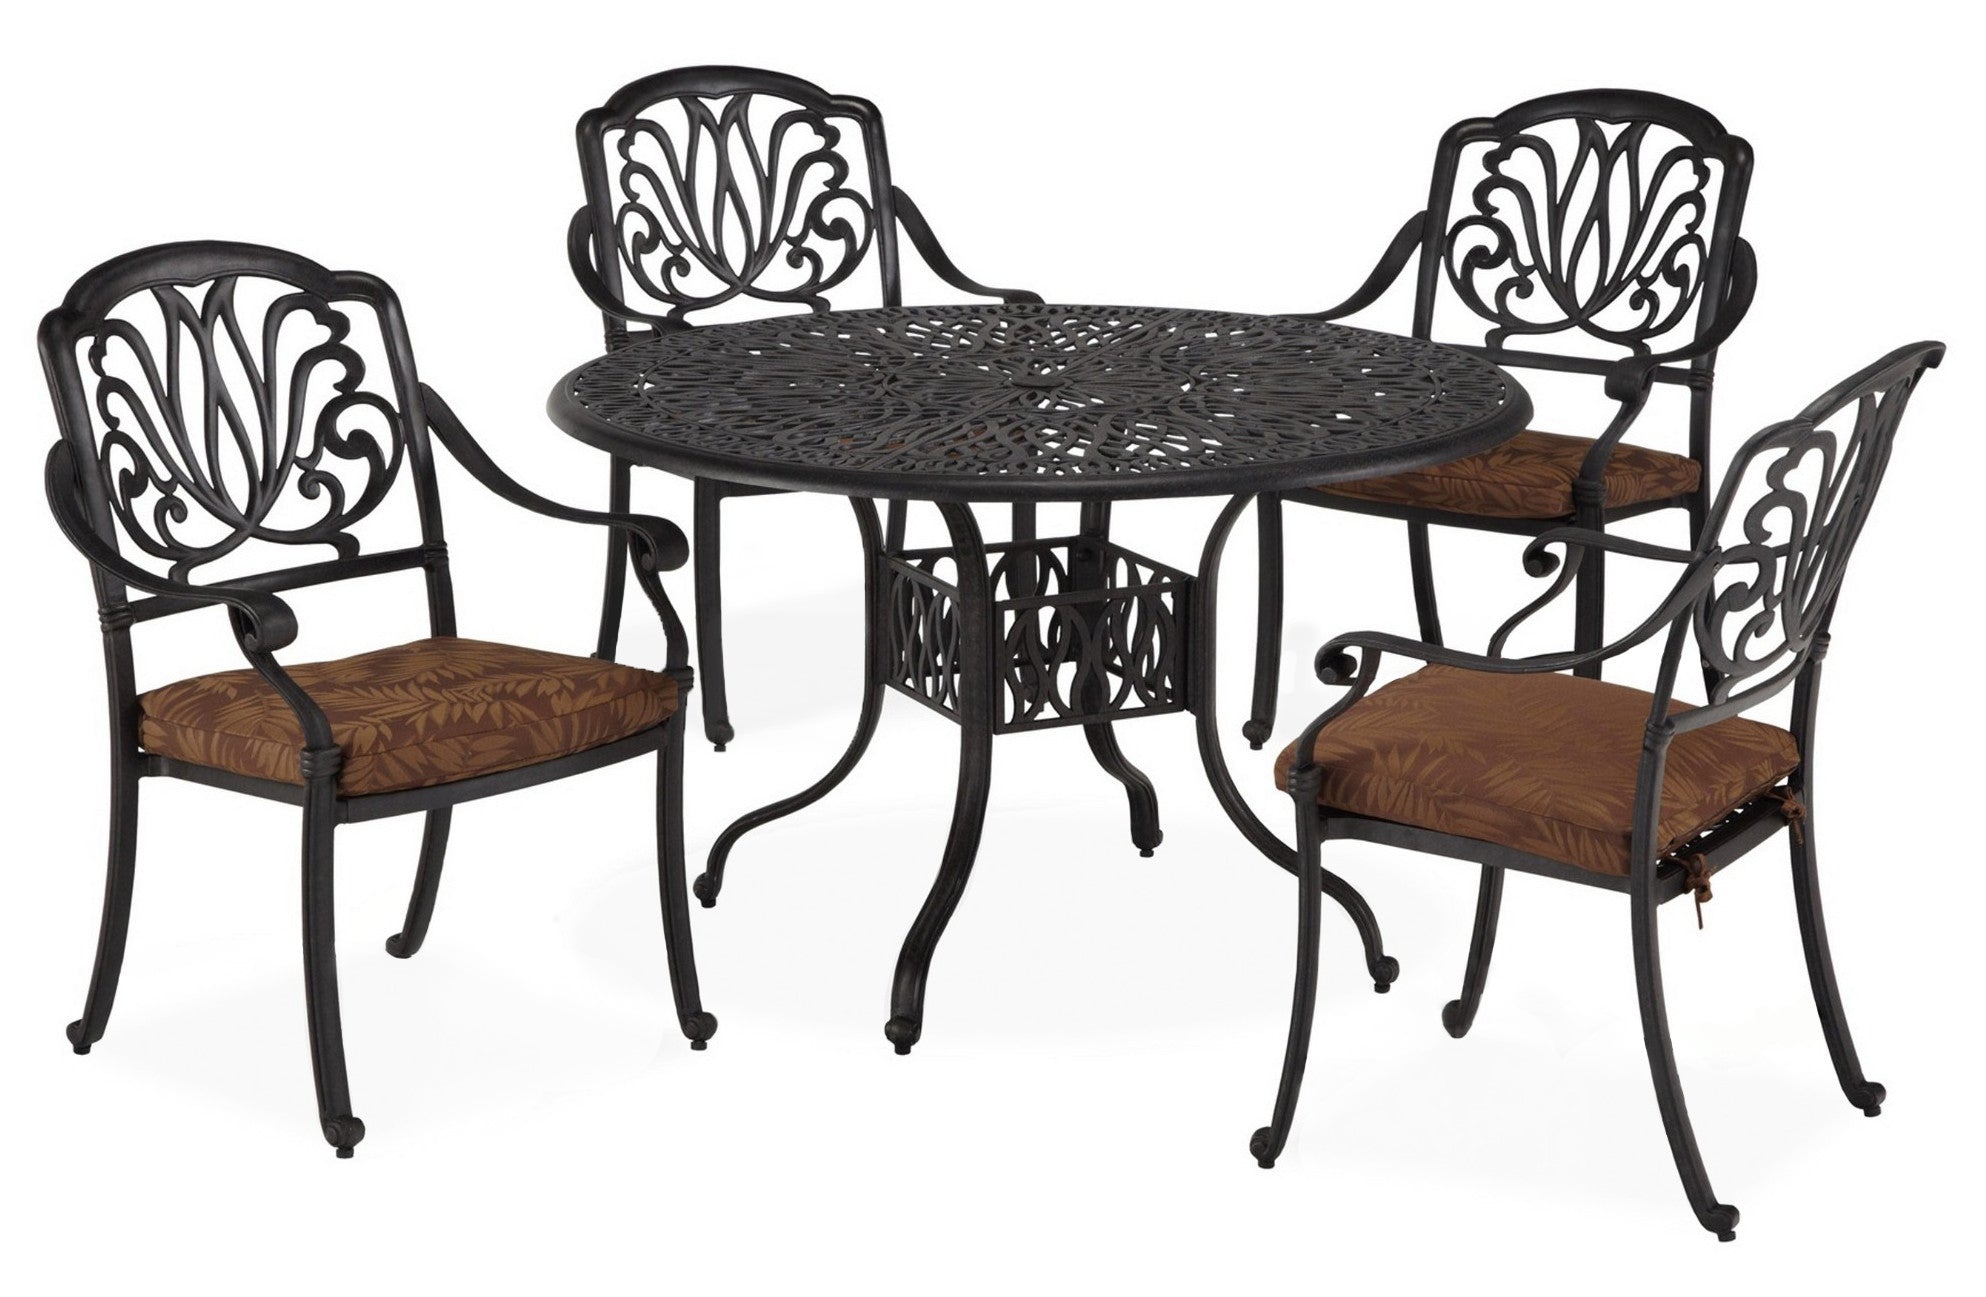 Capri 5 Piece Outdoor Dining Set by Homestyles - 6658-328